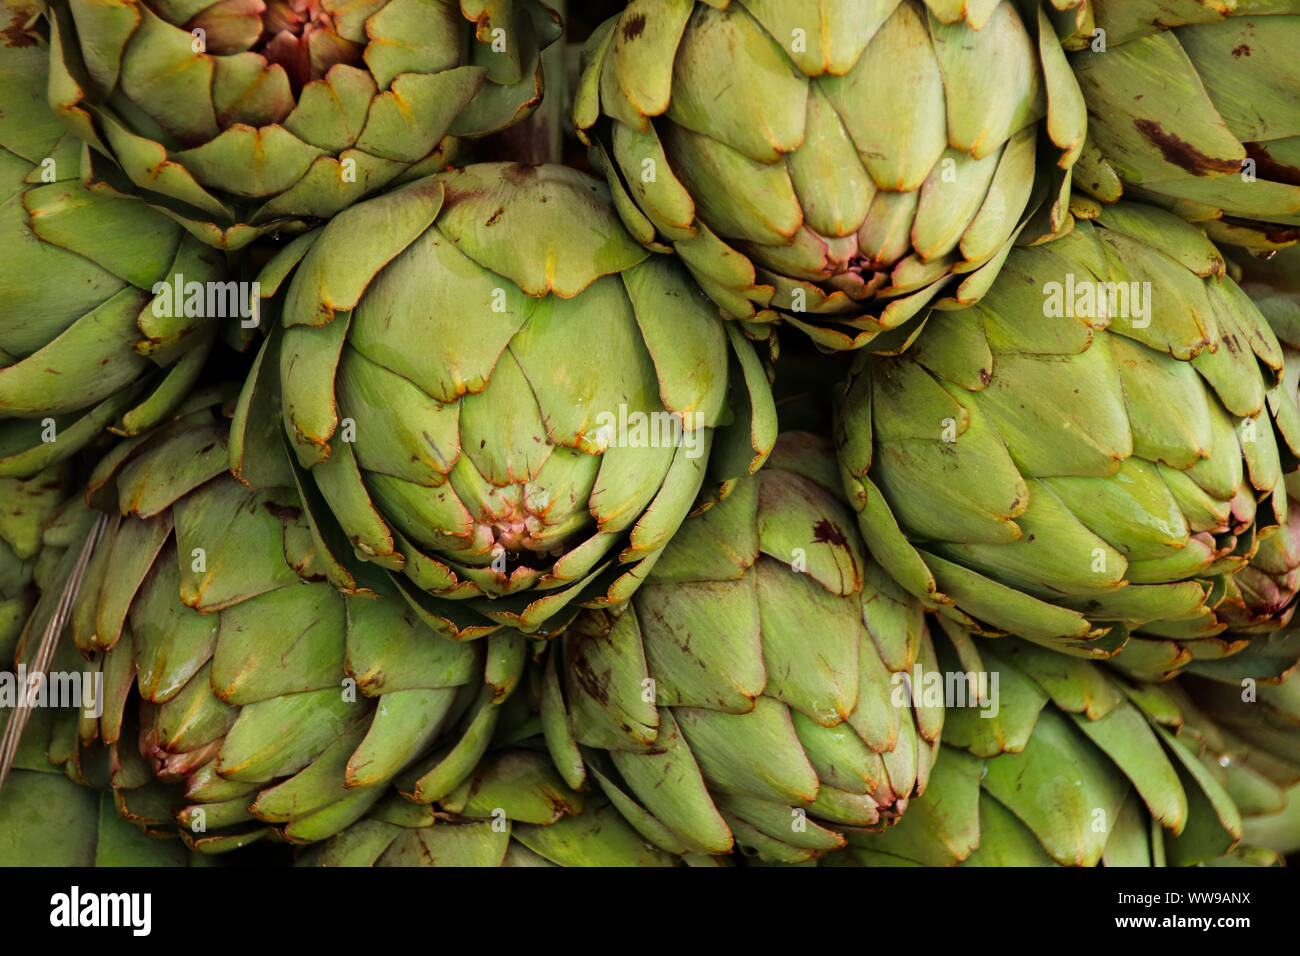 Close up of fresh artichokes staked on top of each other Stock Photo